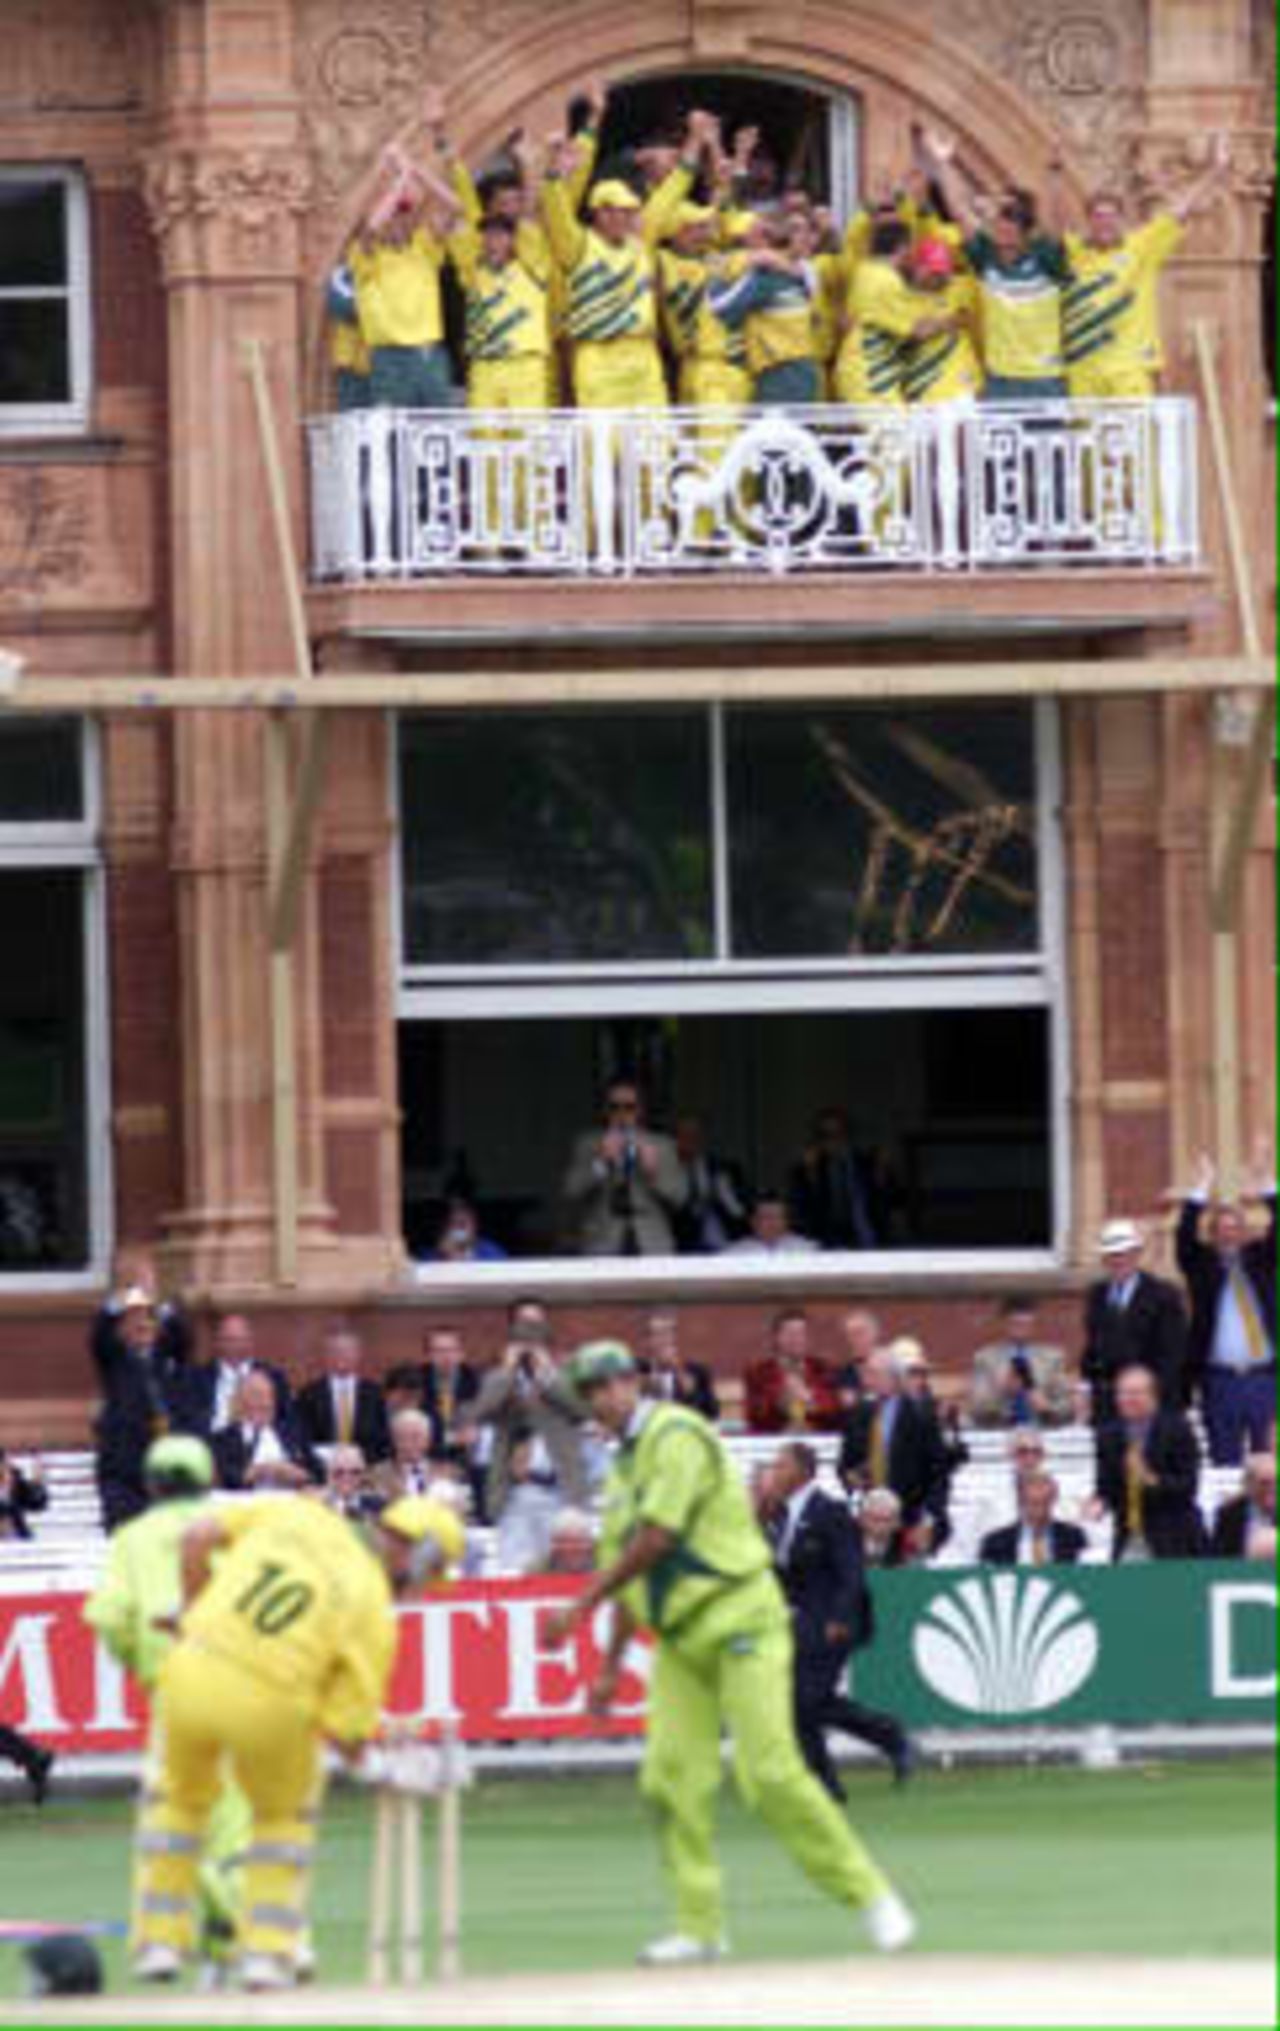 Australia`s cricket team celebrate from their dressing room balcony as the winning runs are scored against Pakistan in the World Cup final at Lords in London, whilst Darren Lehman picks up the wickets. Australia won by eight wickets, 20 June 1999.